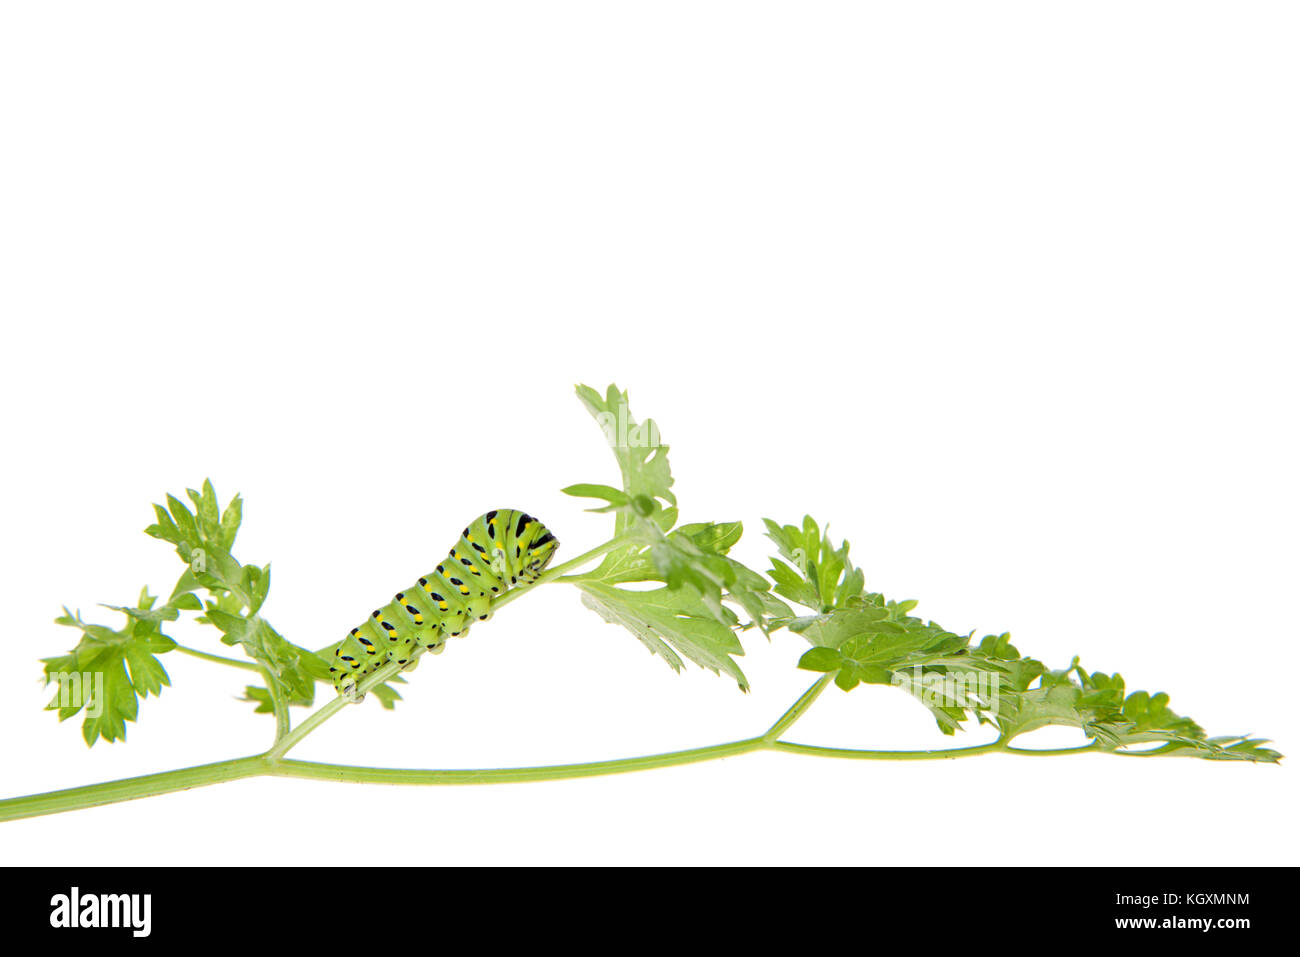 one Black Swallowtail caterpillar,  Papilio polyxenes,  climbing up parsley plant looking for food. Isolated on white background. Stock Photo